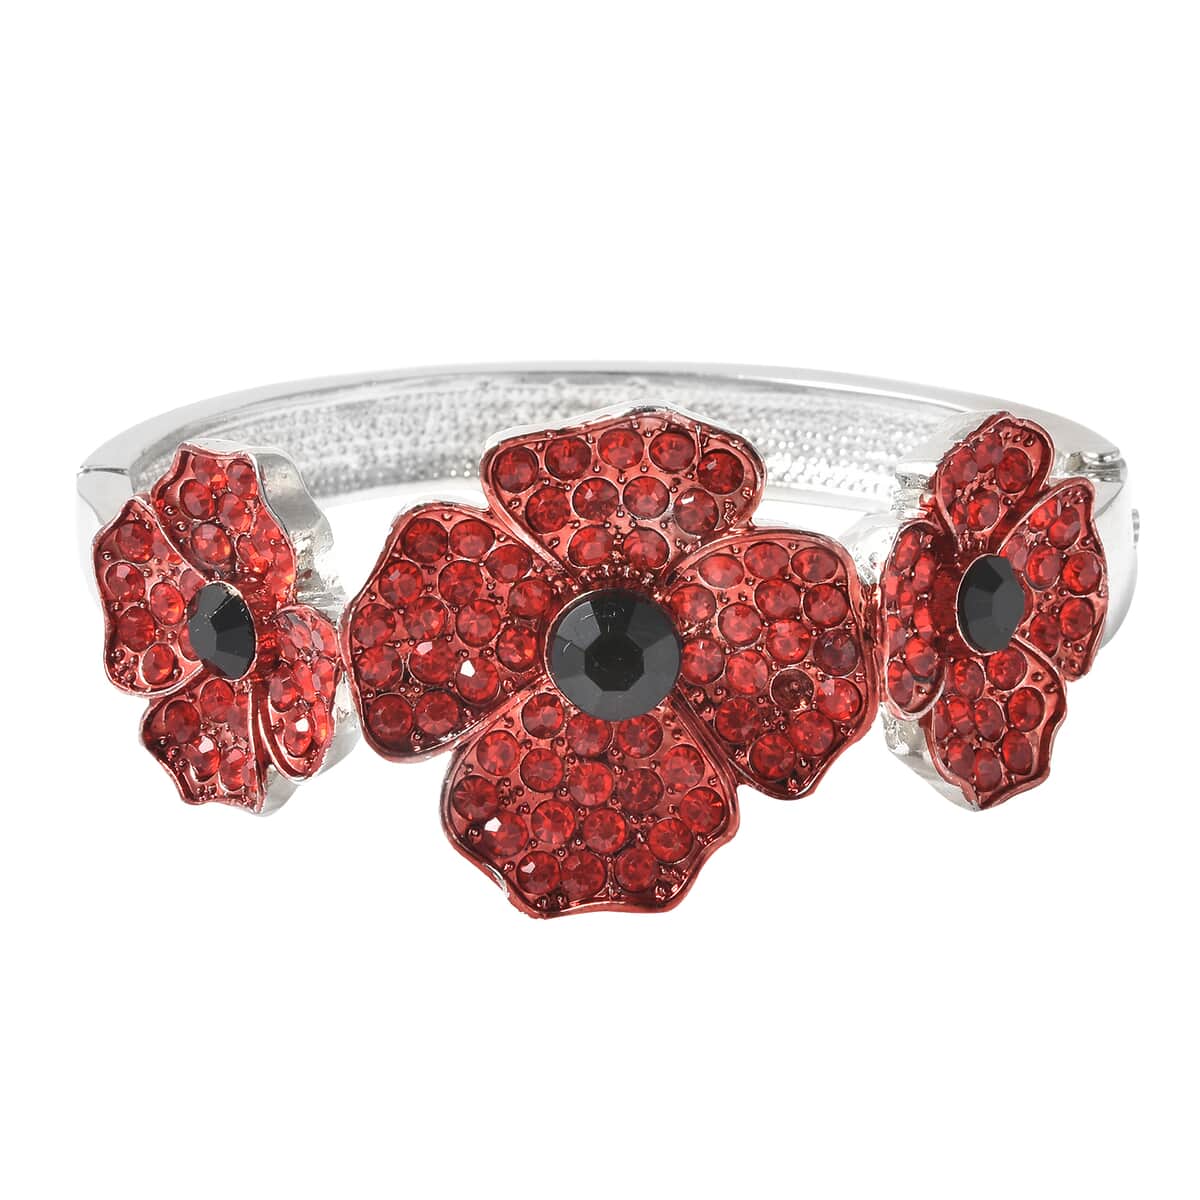 Simulated Black Pearl, Red and Black Austrian Crystal Enameled Poppy Design Bangle Bracelet in Silvertone (7 in) image number 0